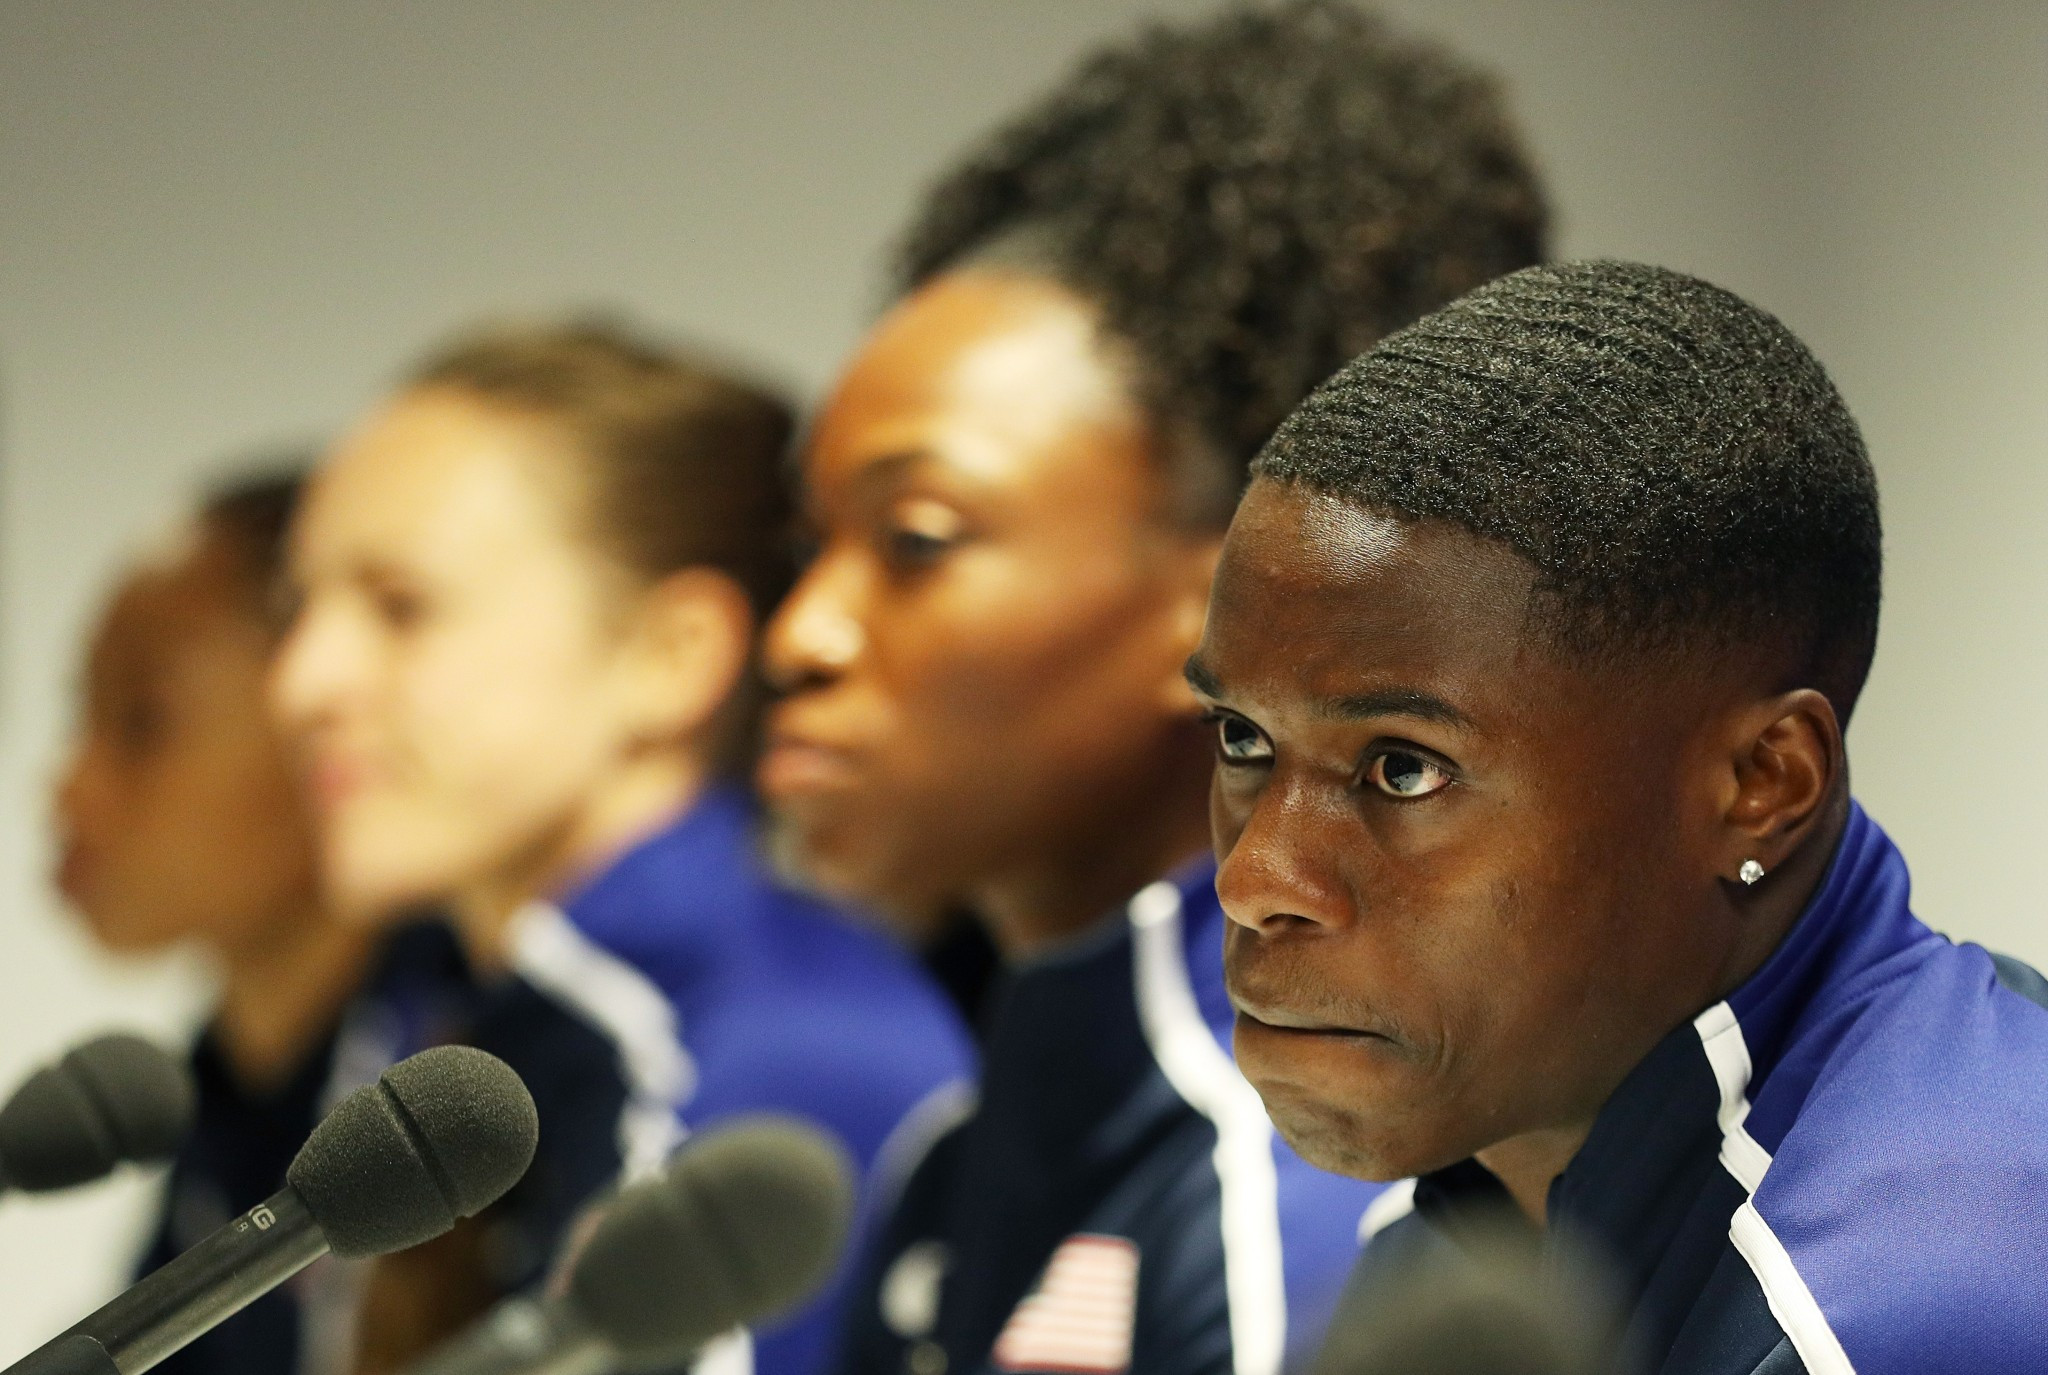 Christian Coleman was confident he could beat Usain Bolt when asked about going up against the Jamaican at a USATF press conference ©Getty Images